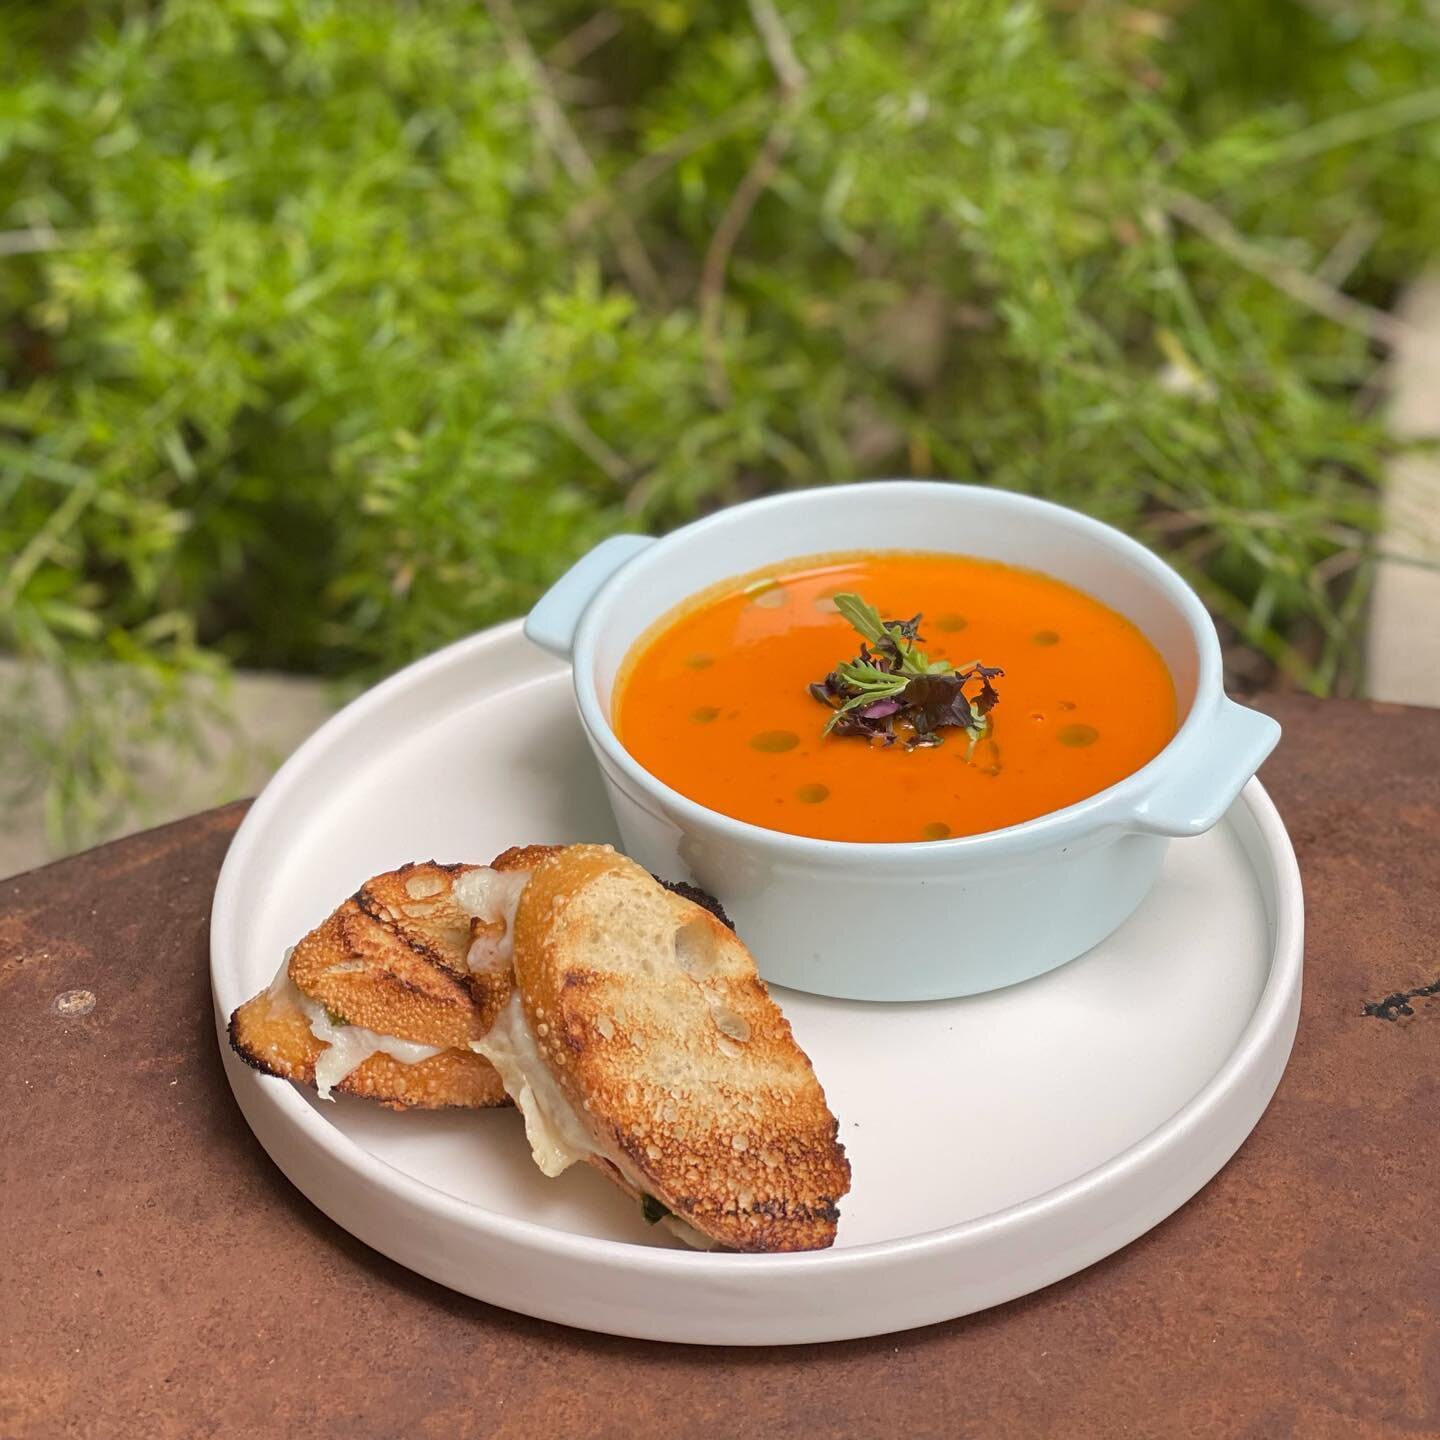 Perfect weather for Tomato Parmesan Bisque and Mini Grilled Cheese 🍅 by @chefsundeep